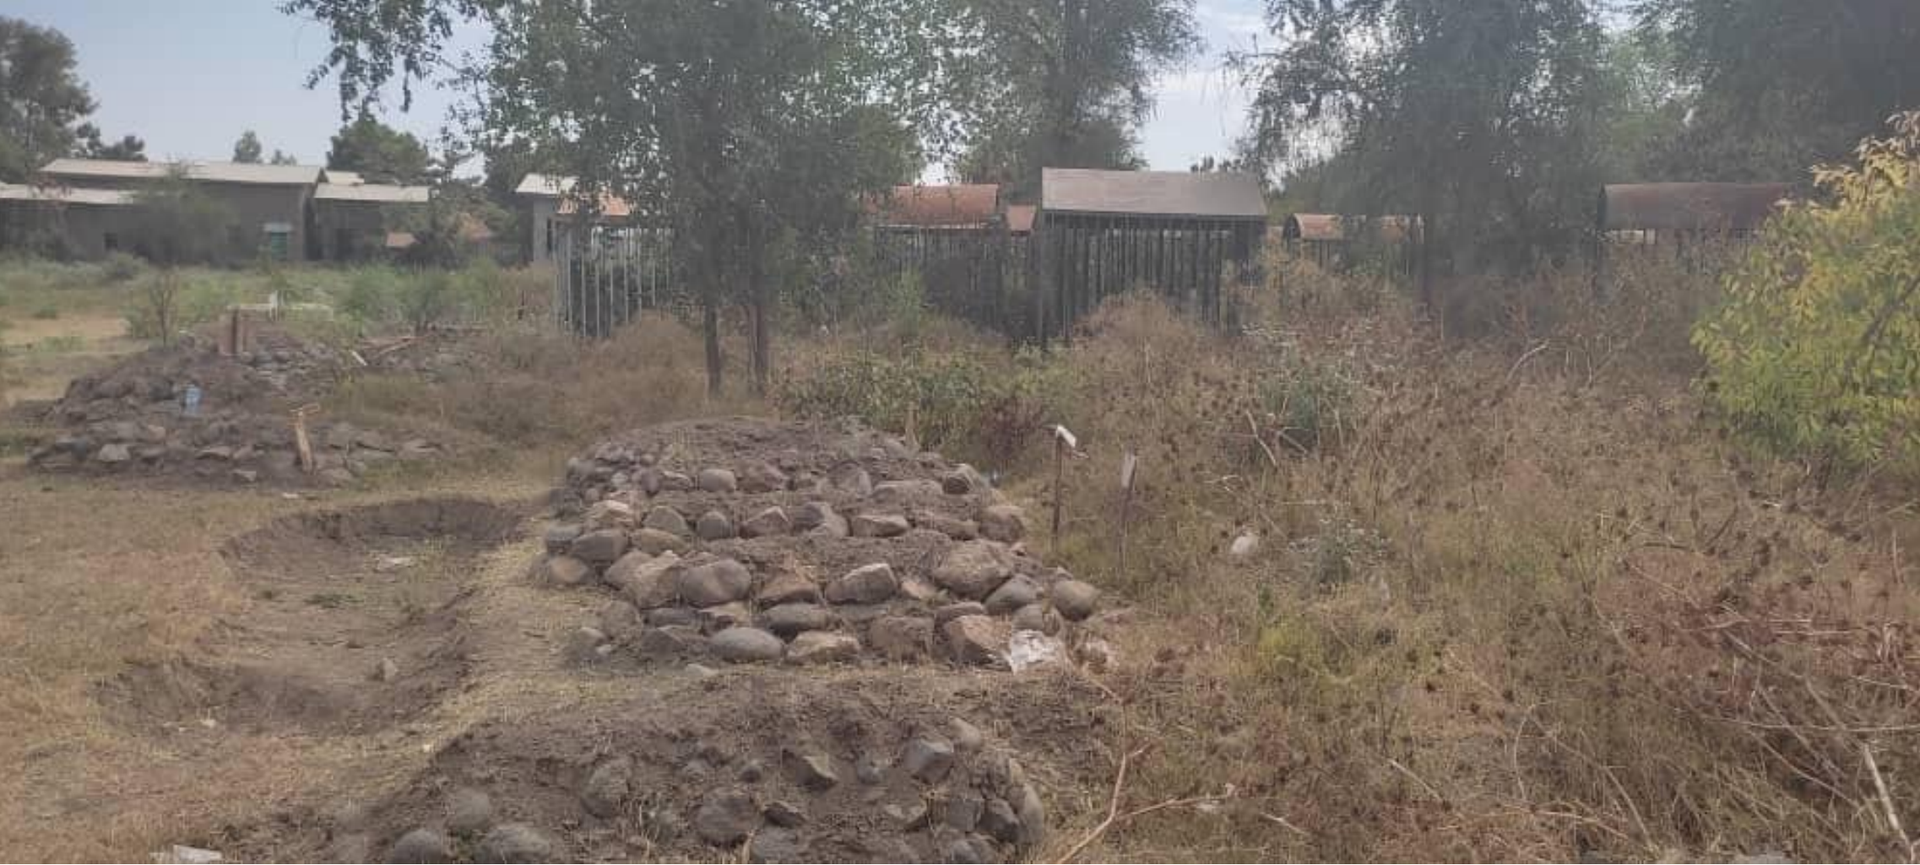 New graves in the St. George’s Church graveyard in Kobo, Ethiopia, where witnesses and survivors told Amnesty International that they buried those summarily killed by Tigrayan forces on 9 September 2021. - Sputnik International, 1920, 16.02.2022